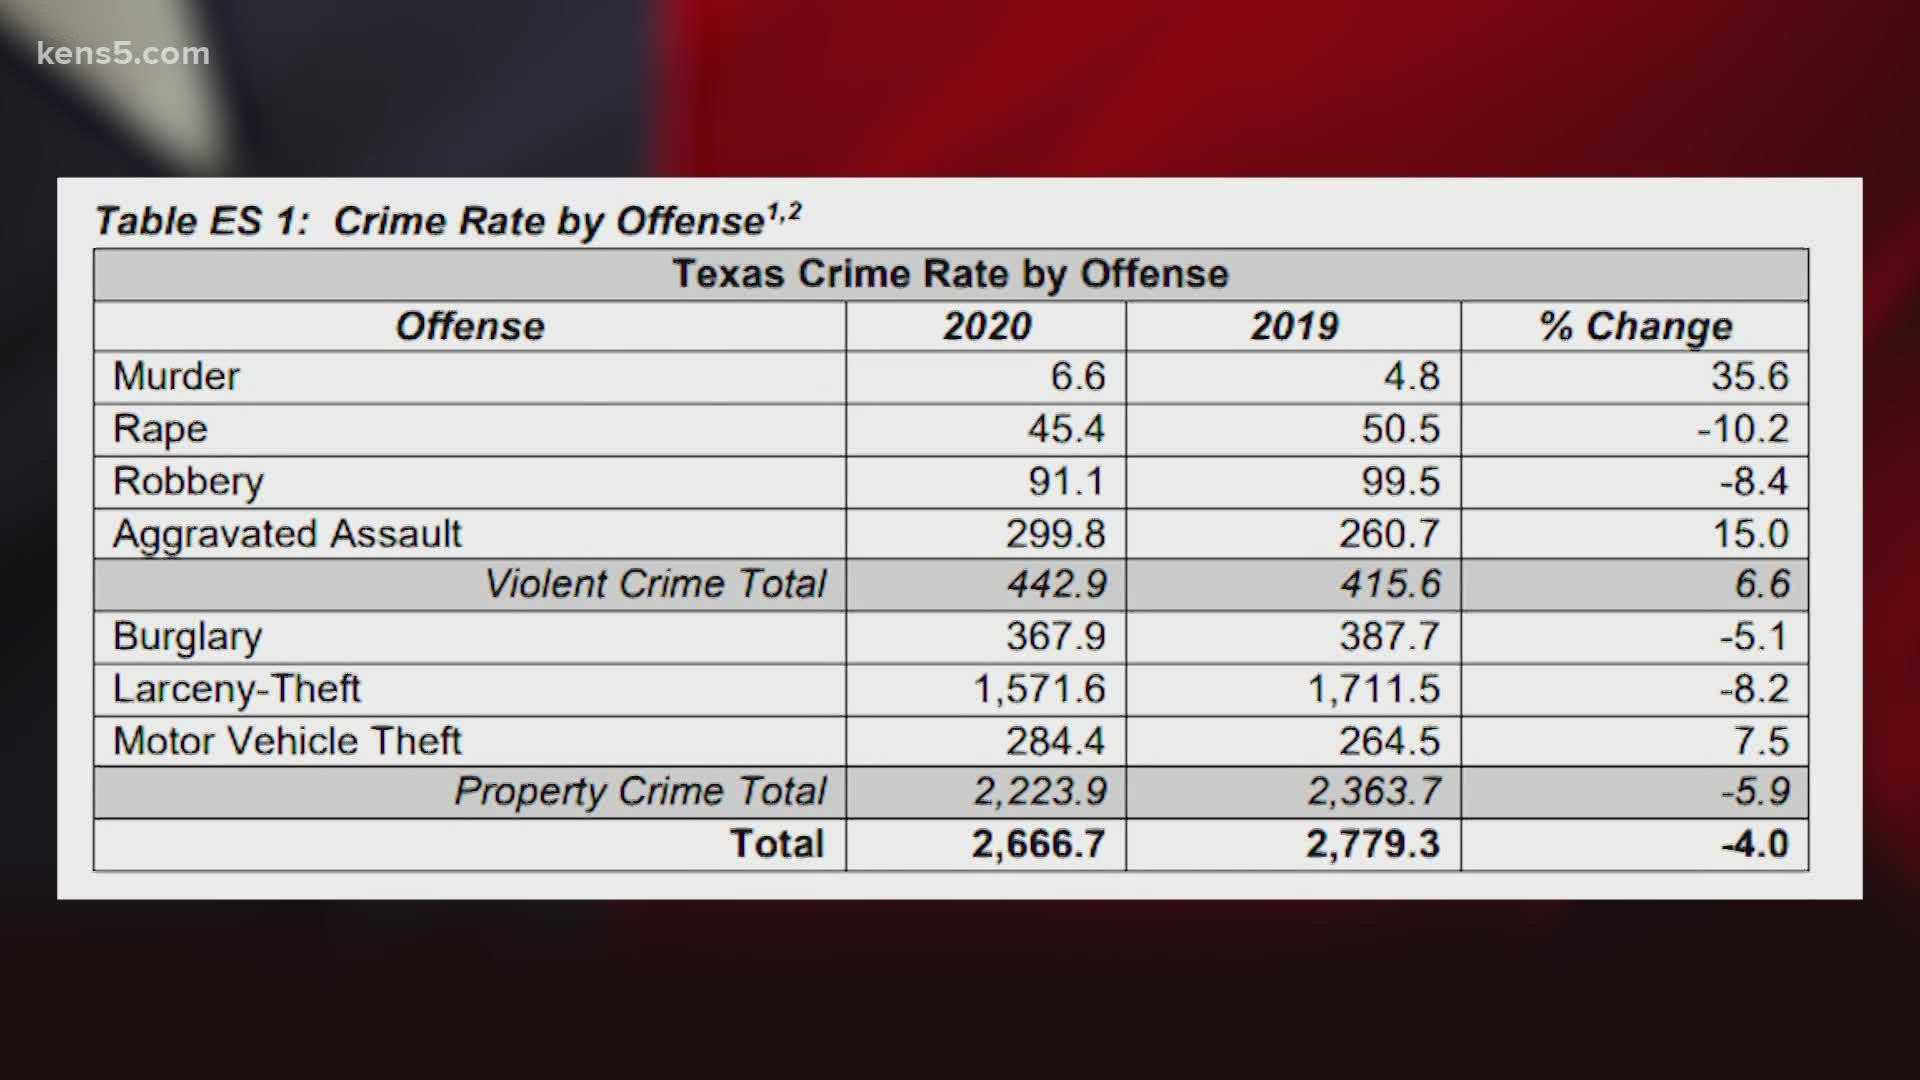 The report shows overall crime in 2020 is slightly down compared to 2019, but the number of murders and aggravated assaults increased.